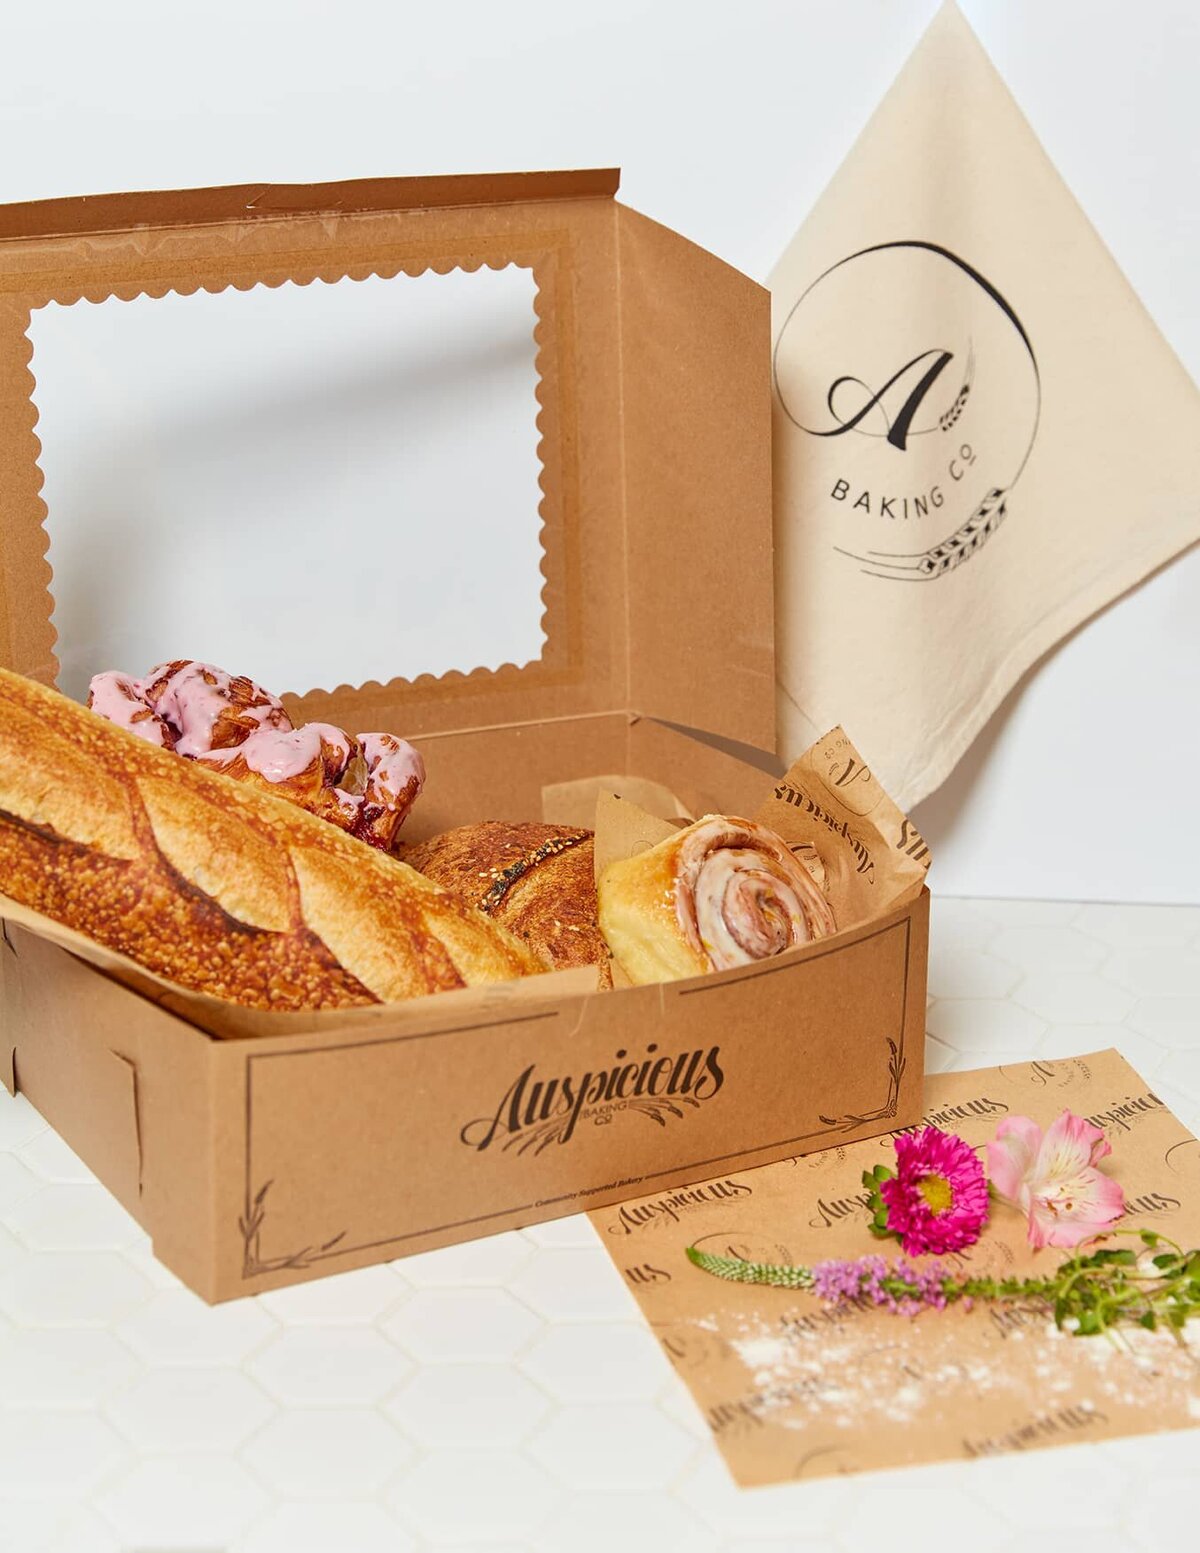 A large box sits open, overflowing with pastries. The front of box is printed with the Auspicious logo and a custom design